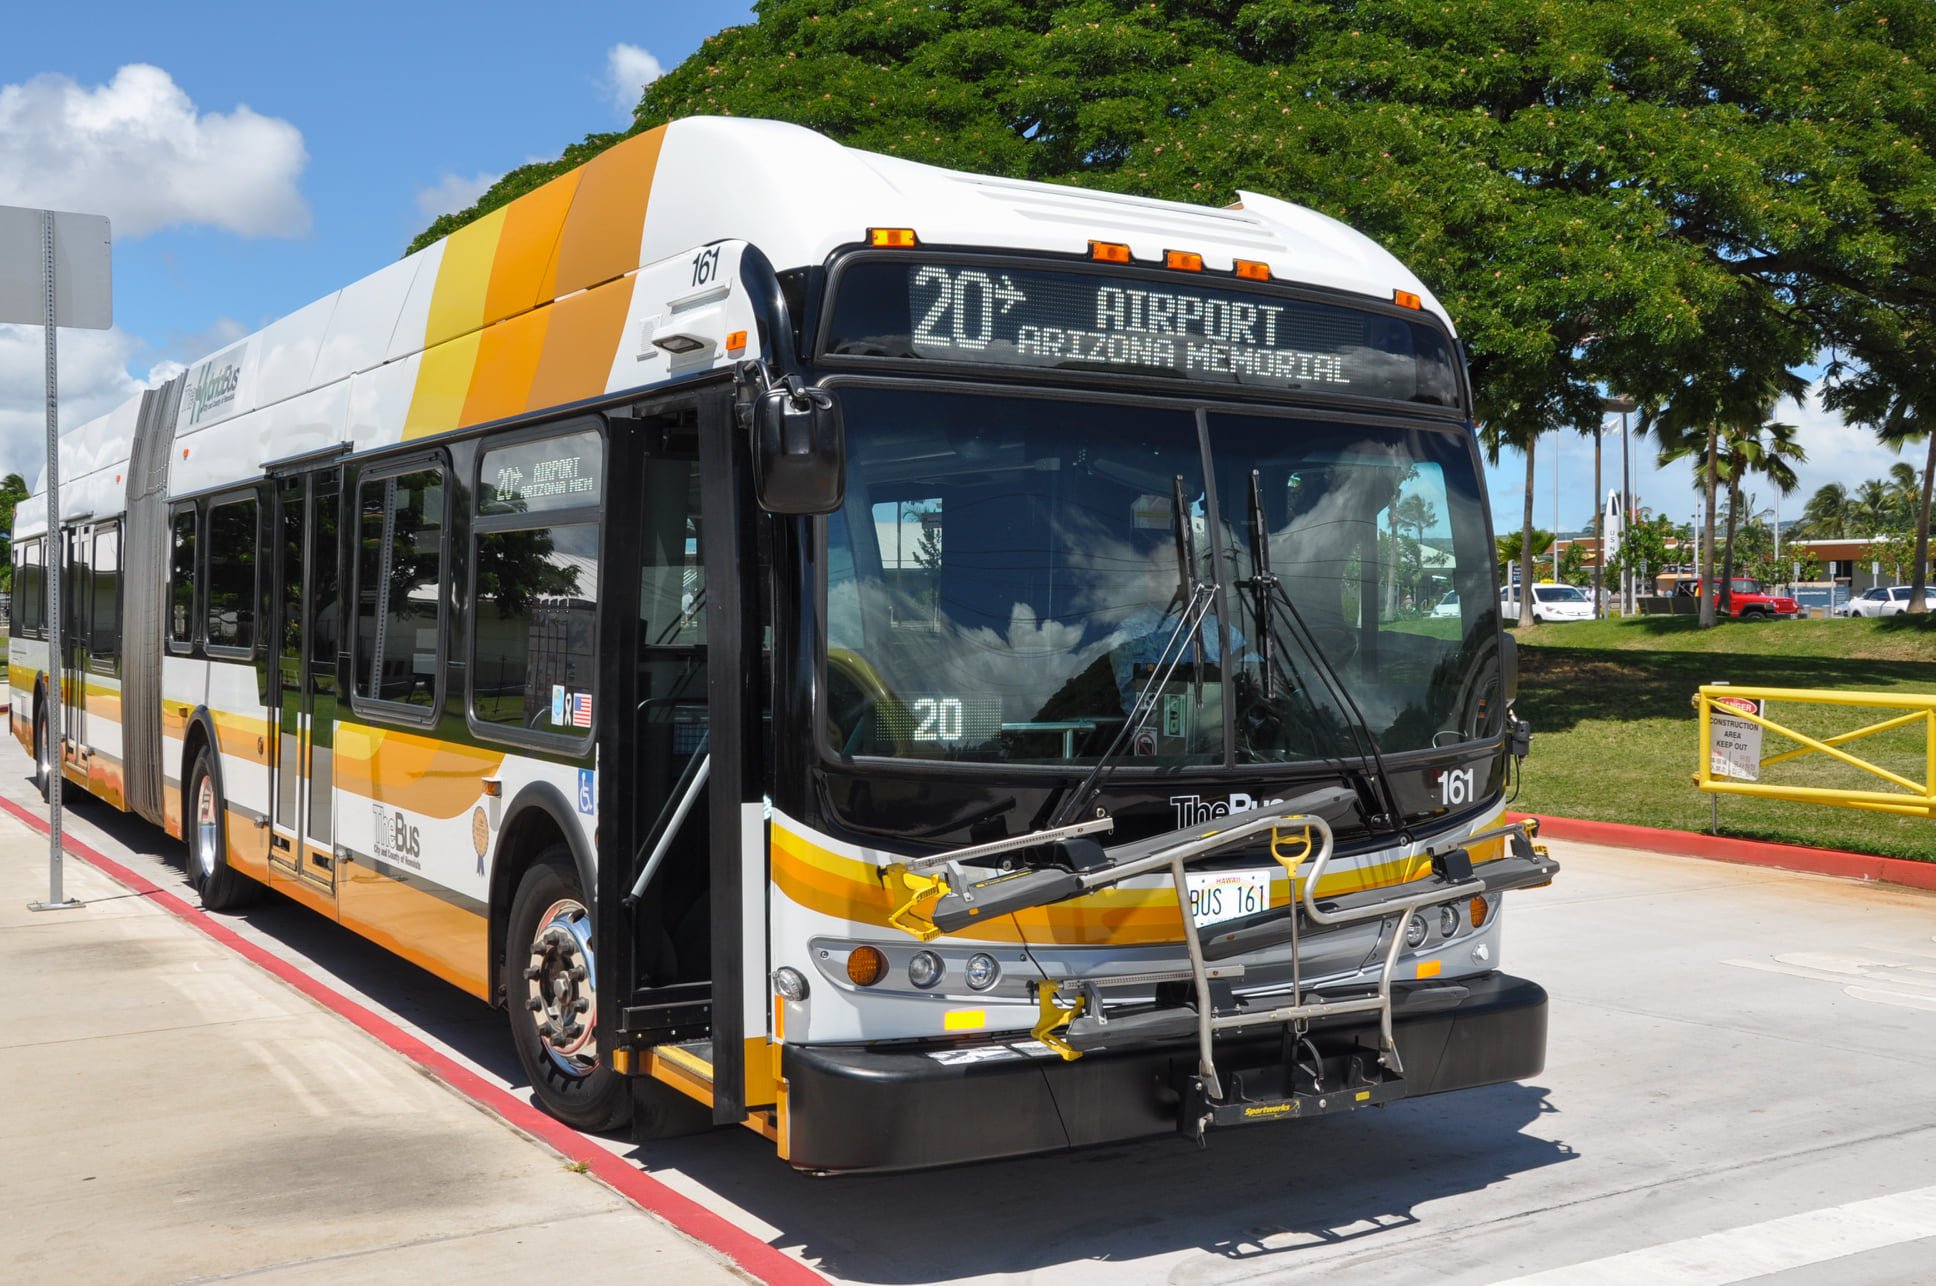 How To Get From Honolulu Airport To Kailua - All Possible Ways, cheapest way from Honolulu airport to Kailua, Honolulu airport to Kailua, Honolulu Airport Bus To Kailua, Honolulu to Laie